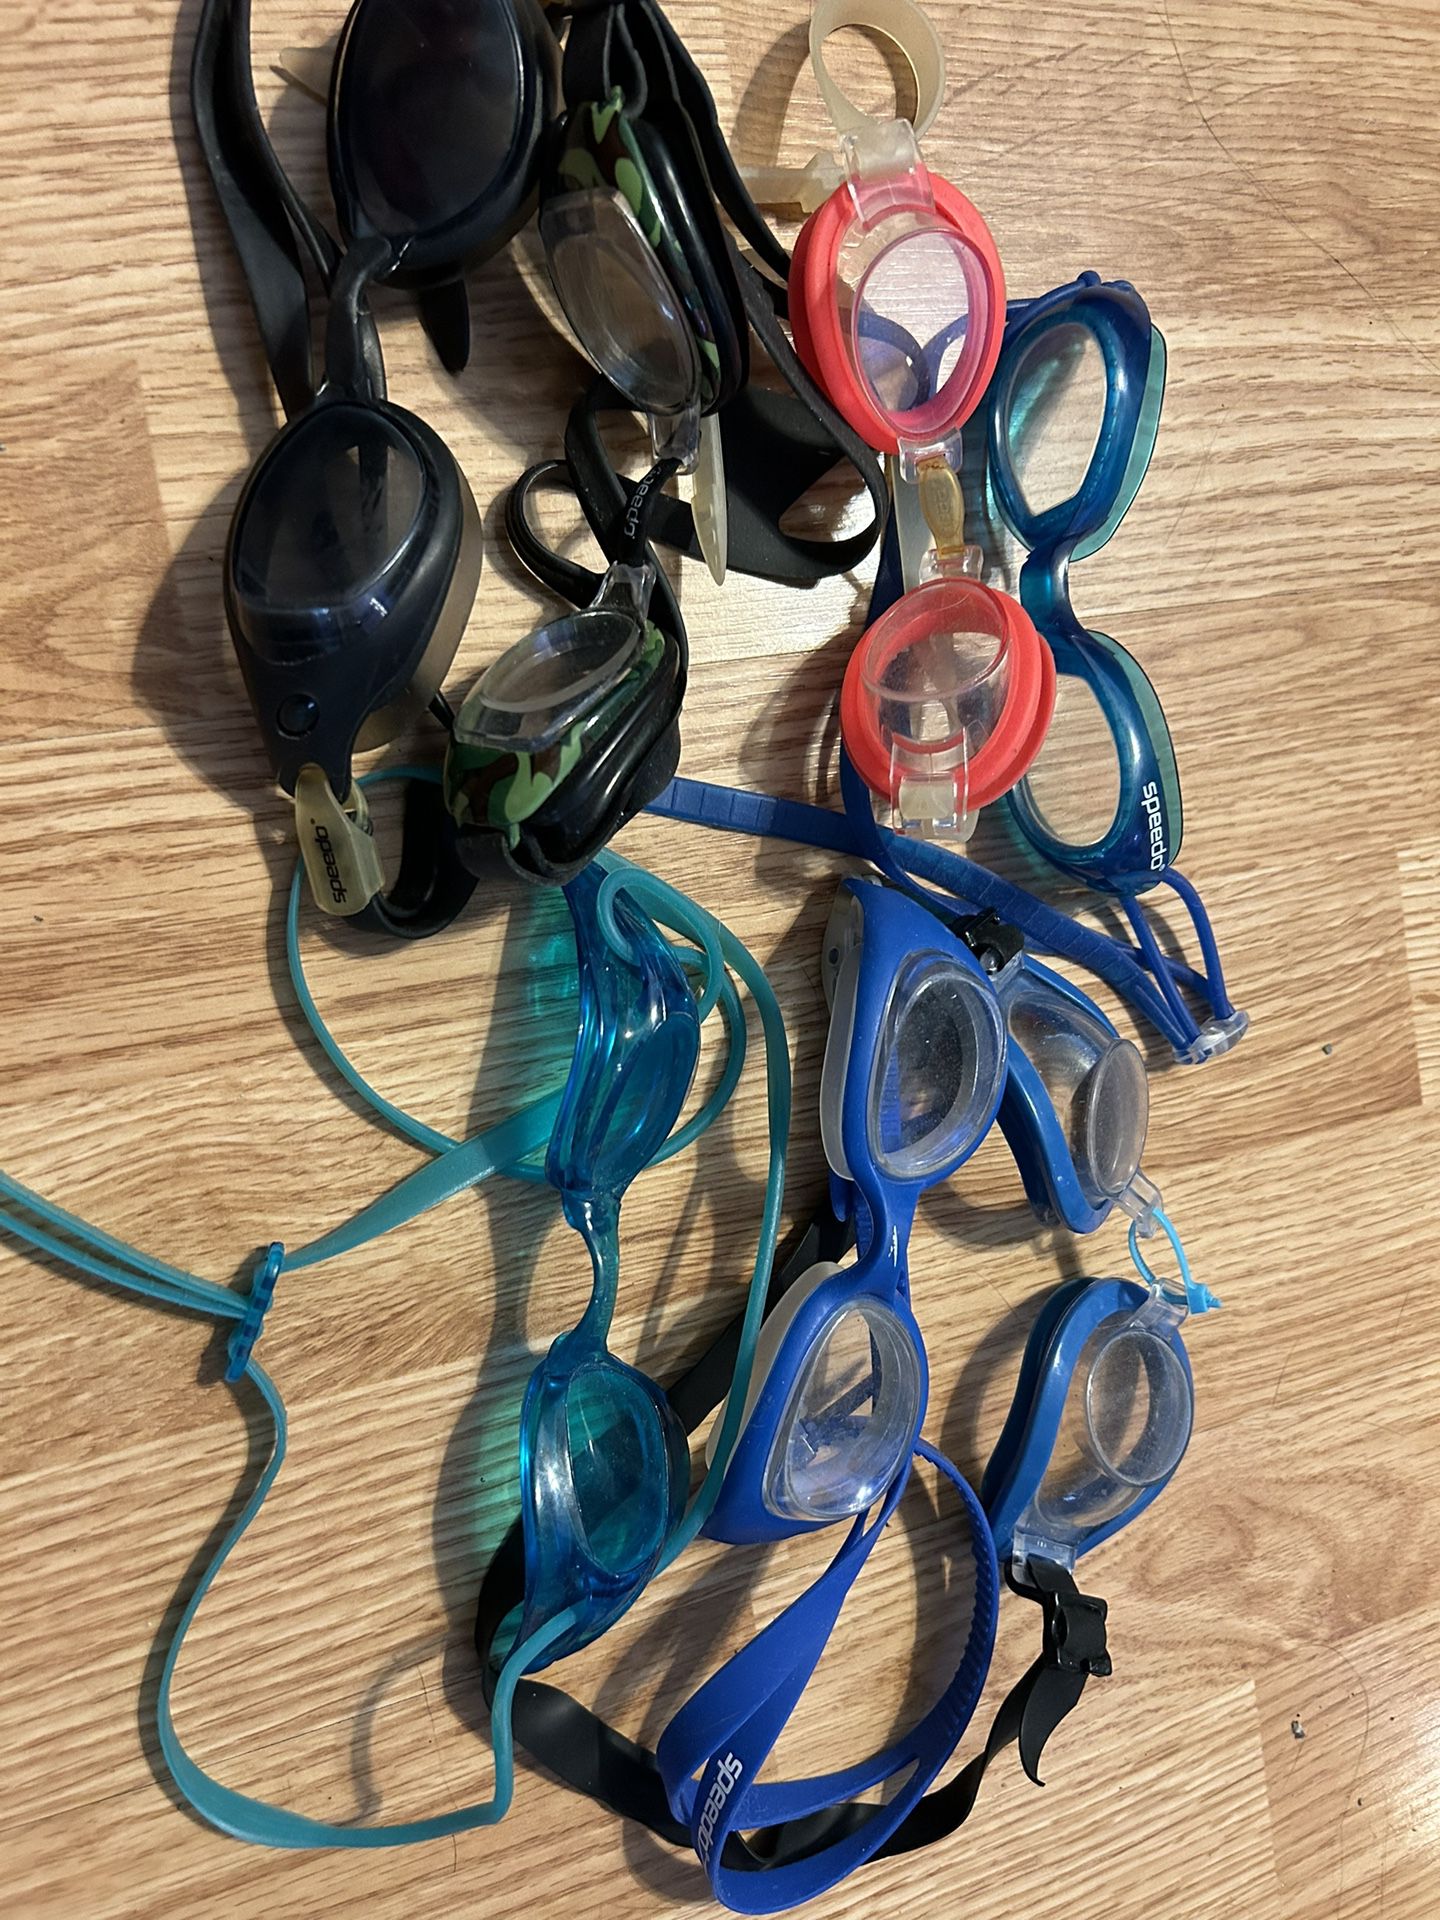 All Toys For Swimming Pool Or Bath Tubs - Goggles